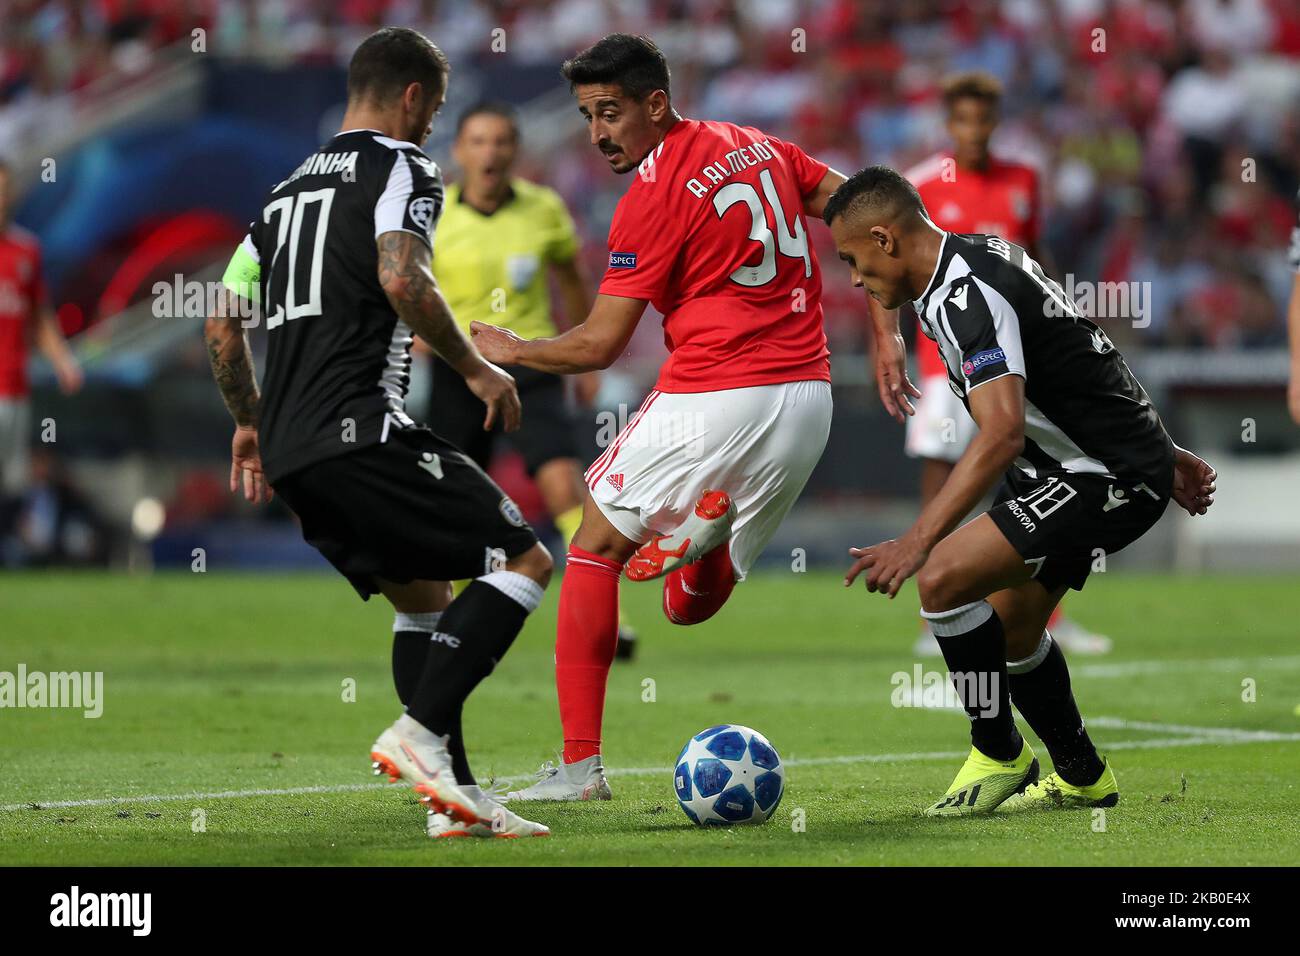 Benfica's Portuguese defender Andre Almeida (C ) vies with PAOK's midfielder Vieirinha from Portugal (L) and forward Leo Jaba from Brazil during the UEFA Champions League play-off first leg match SL Benfica vs PAOK FC at the Luz Stadium in Lisbon, Portugal on August 21, 2018. (Photo by Pedro FiÃºza/NurPhoto) Stock Photo